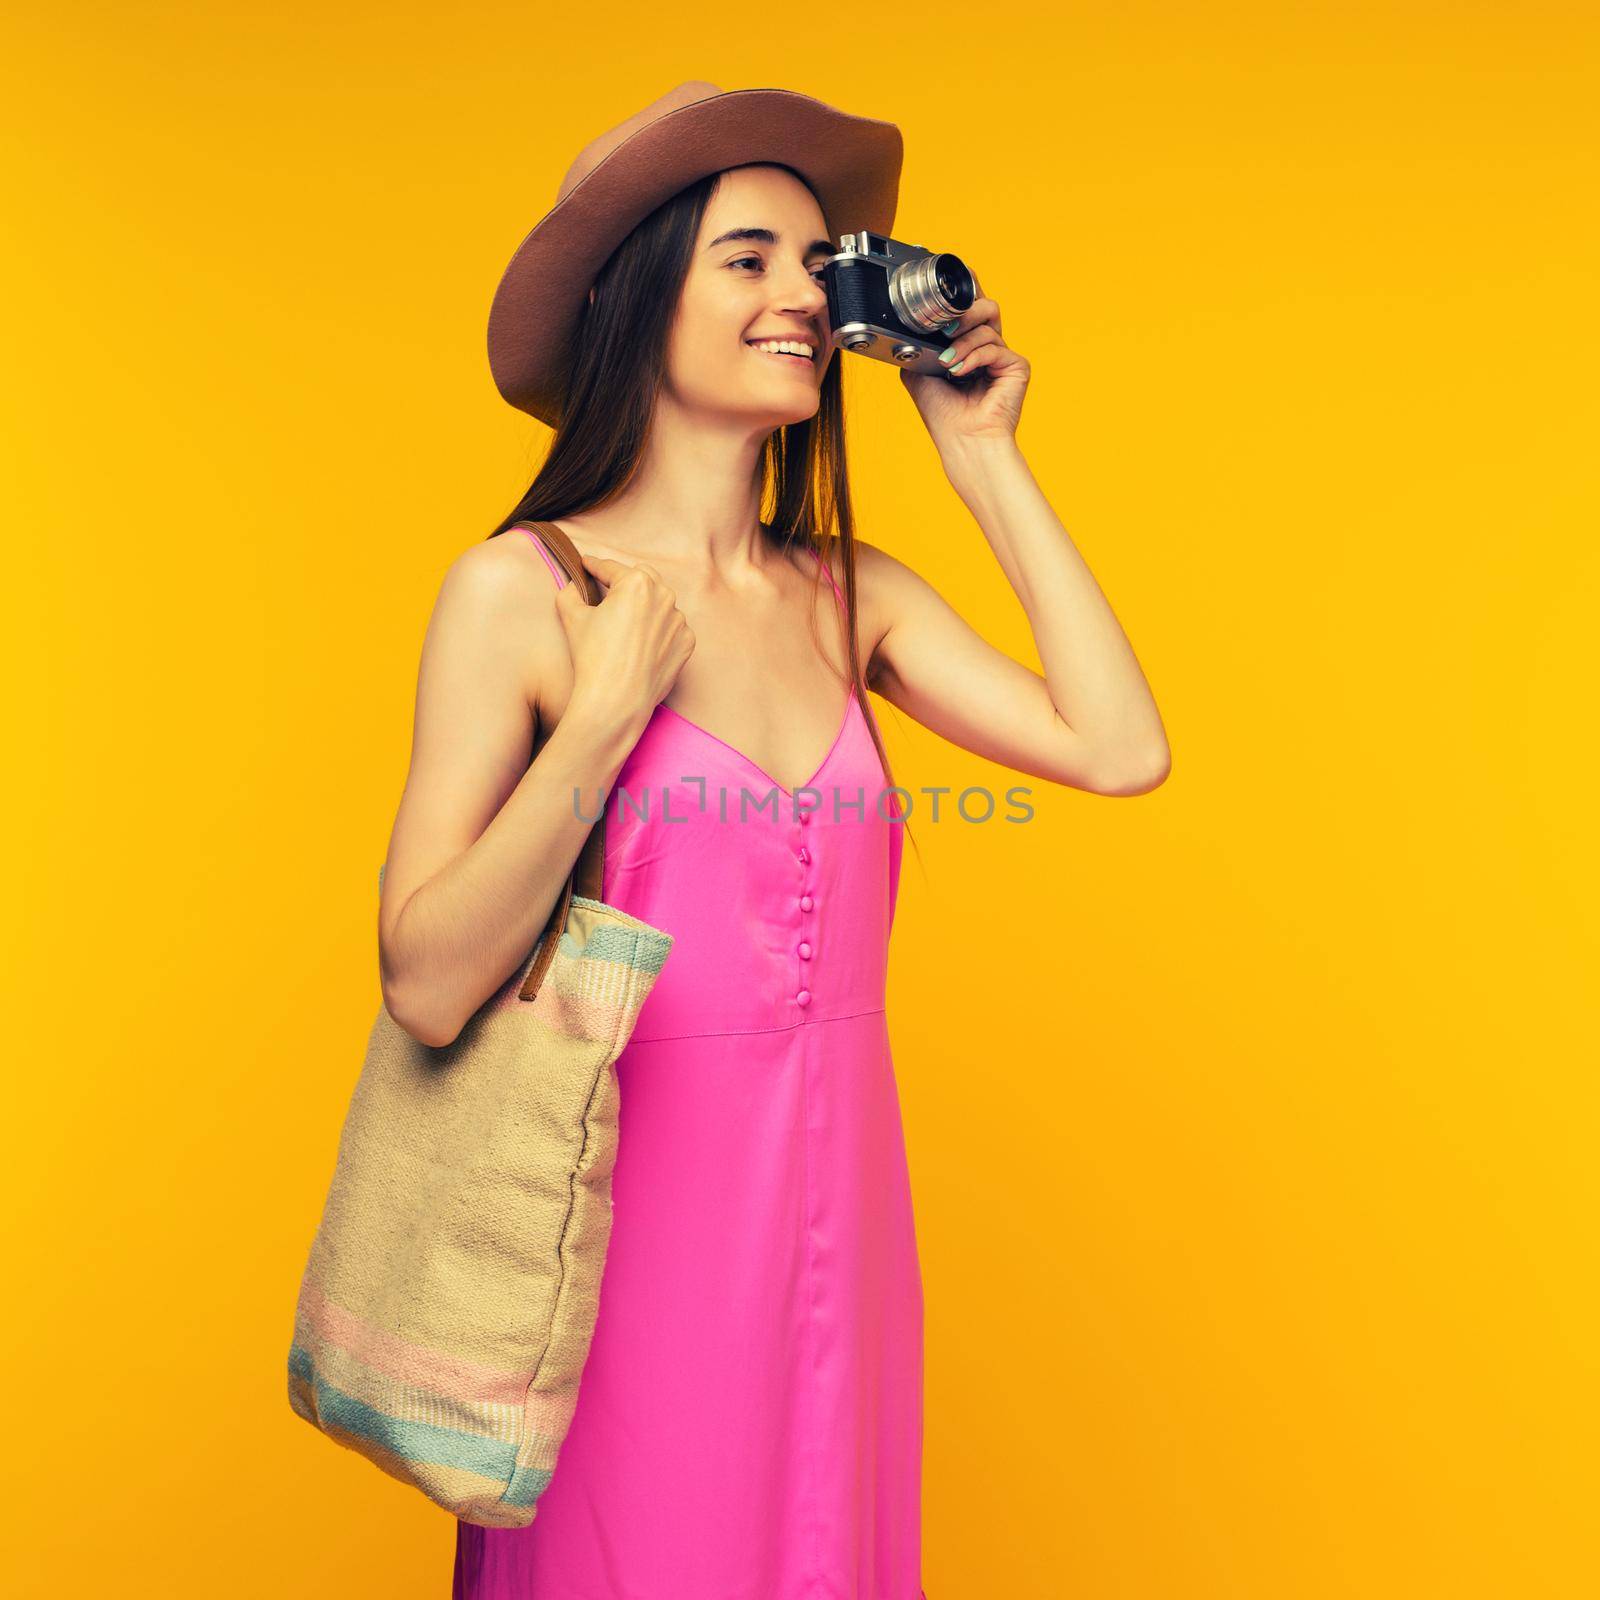 Happy girl in a pink dress and sunglasses holding camera on a yellow background by zartarn